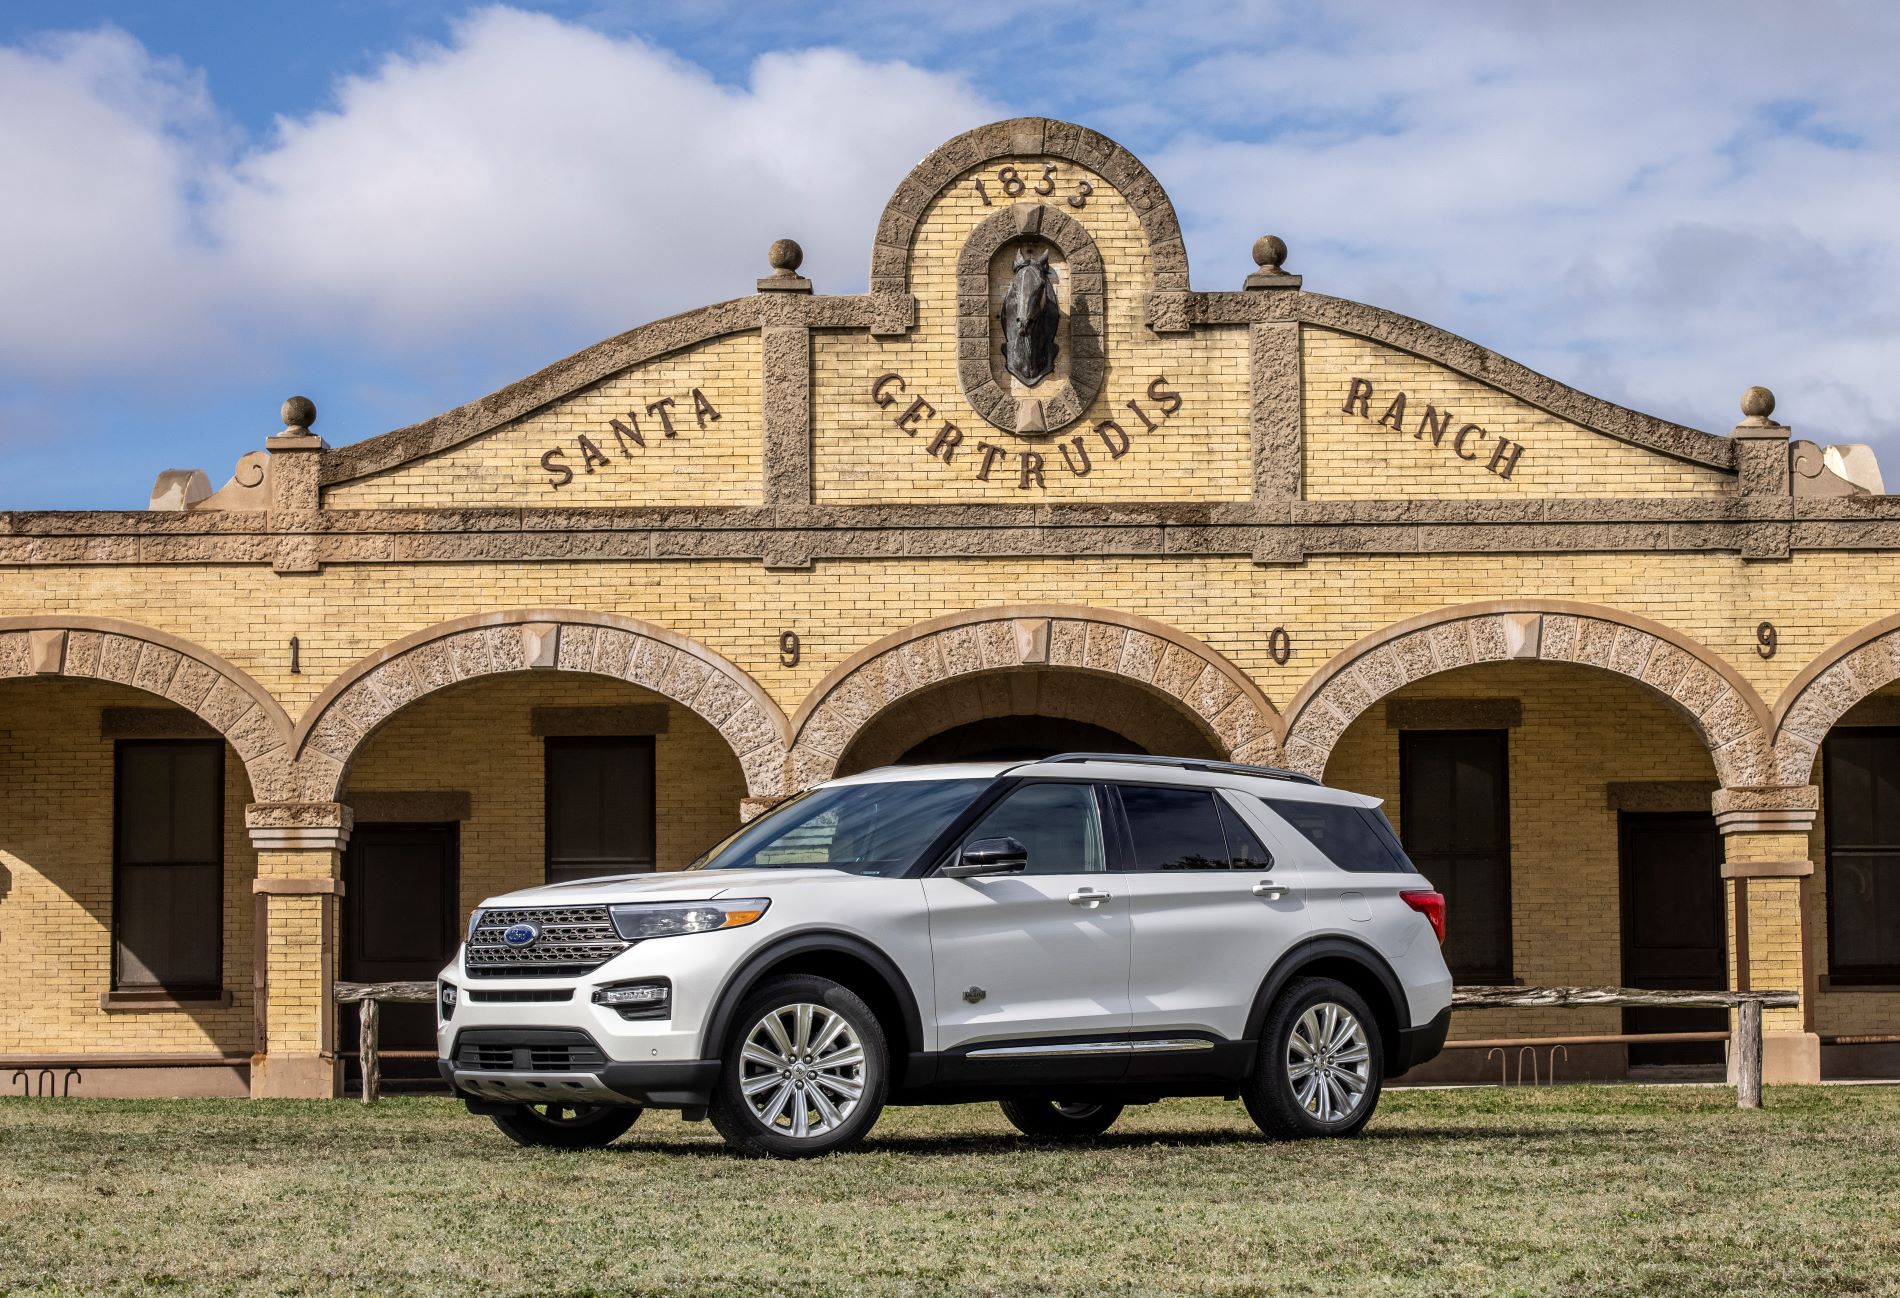 The Ford Explorer King Ranch is filled with key features, like leather seats, rain sensing wipers, universal garage door opener, terrain management system, tri diamond perforated inserts. Check out the explorer king ranch model.